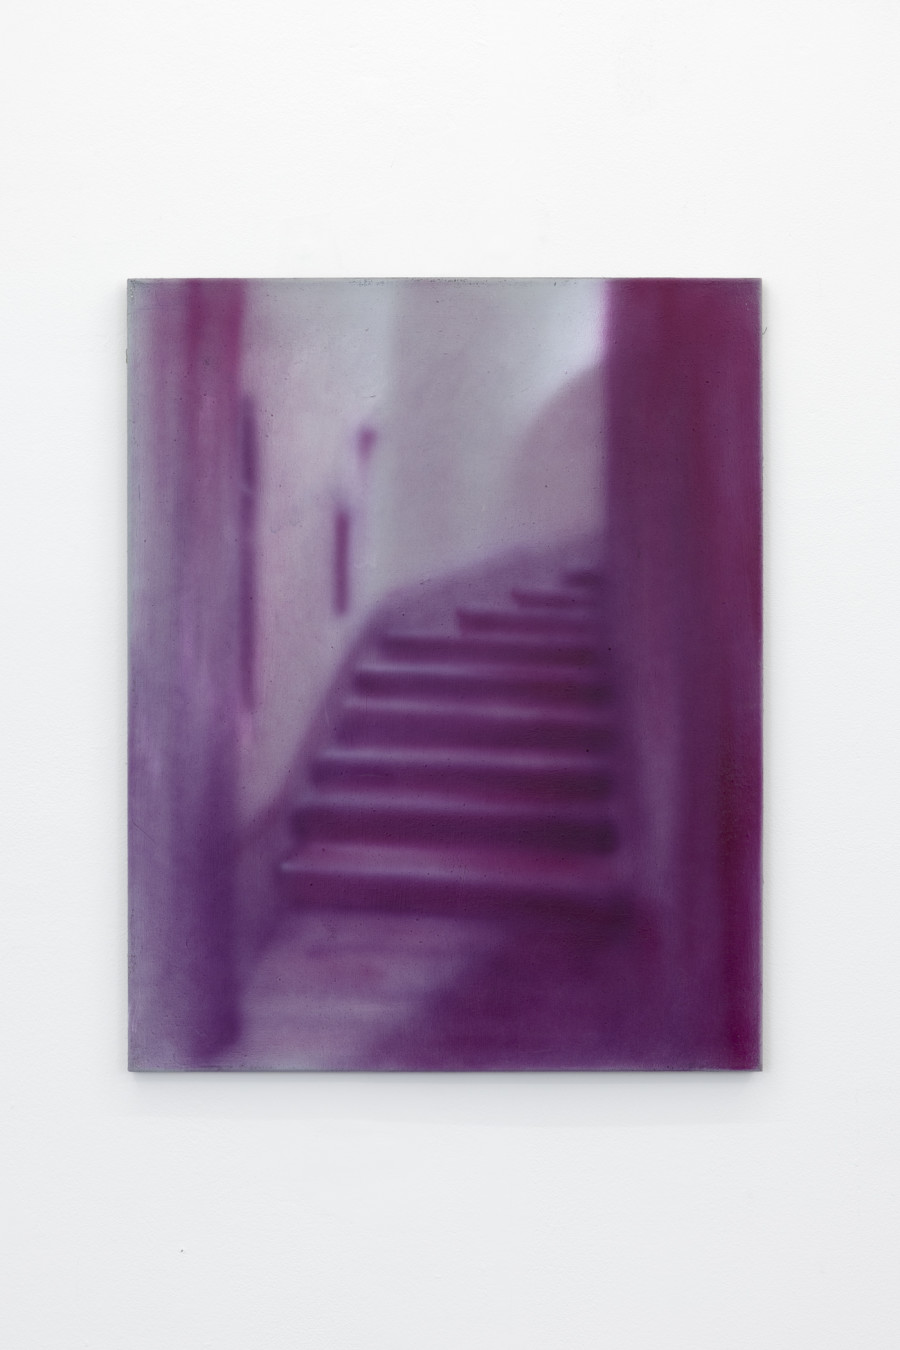 Will Sheldon, Untitled (Pink), 2022, Airbrushed acrylic on canvas, 76 × 61 cm. Courtesy: Weiss Falk and the Artist. Photo: Gina Folly